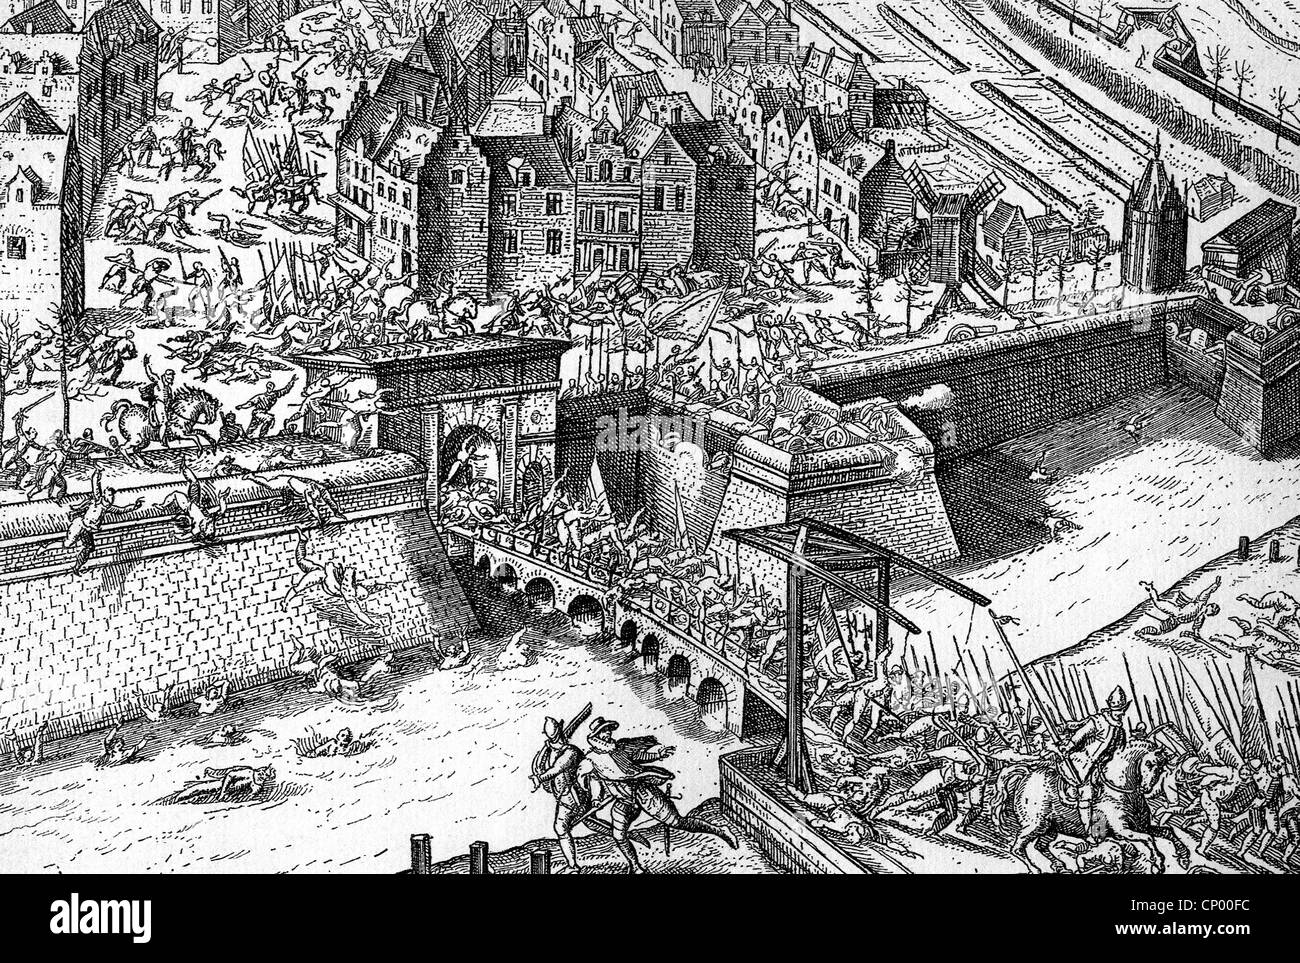 events, Eighty Years' War, 1568 - 1648, an unsuccessful attack of Francis, Duke of Anjou, on Antwerp, 16.1.1583, after contemporary copper engraving, Dutch War of Independence, Netherlands, Brabant, French, Francois d'Alencon, soldiers, fortress, bastion, bastions, retreat, Netherland, mercenaries, Belgium, 16th century, historic, historical, people, Additional-Rights-Clearences-Not Available Stock Photo